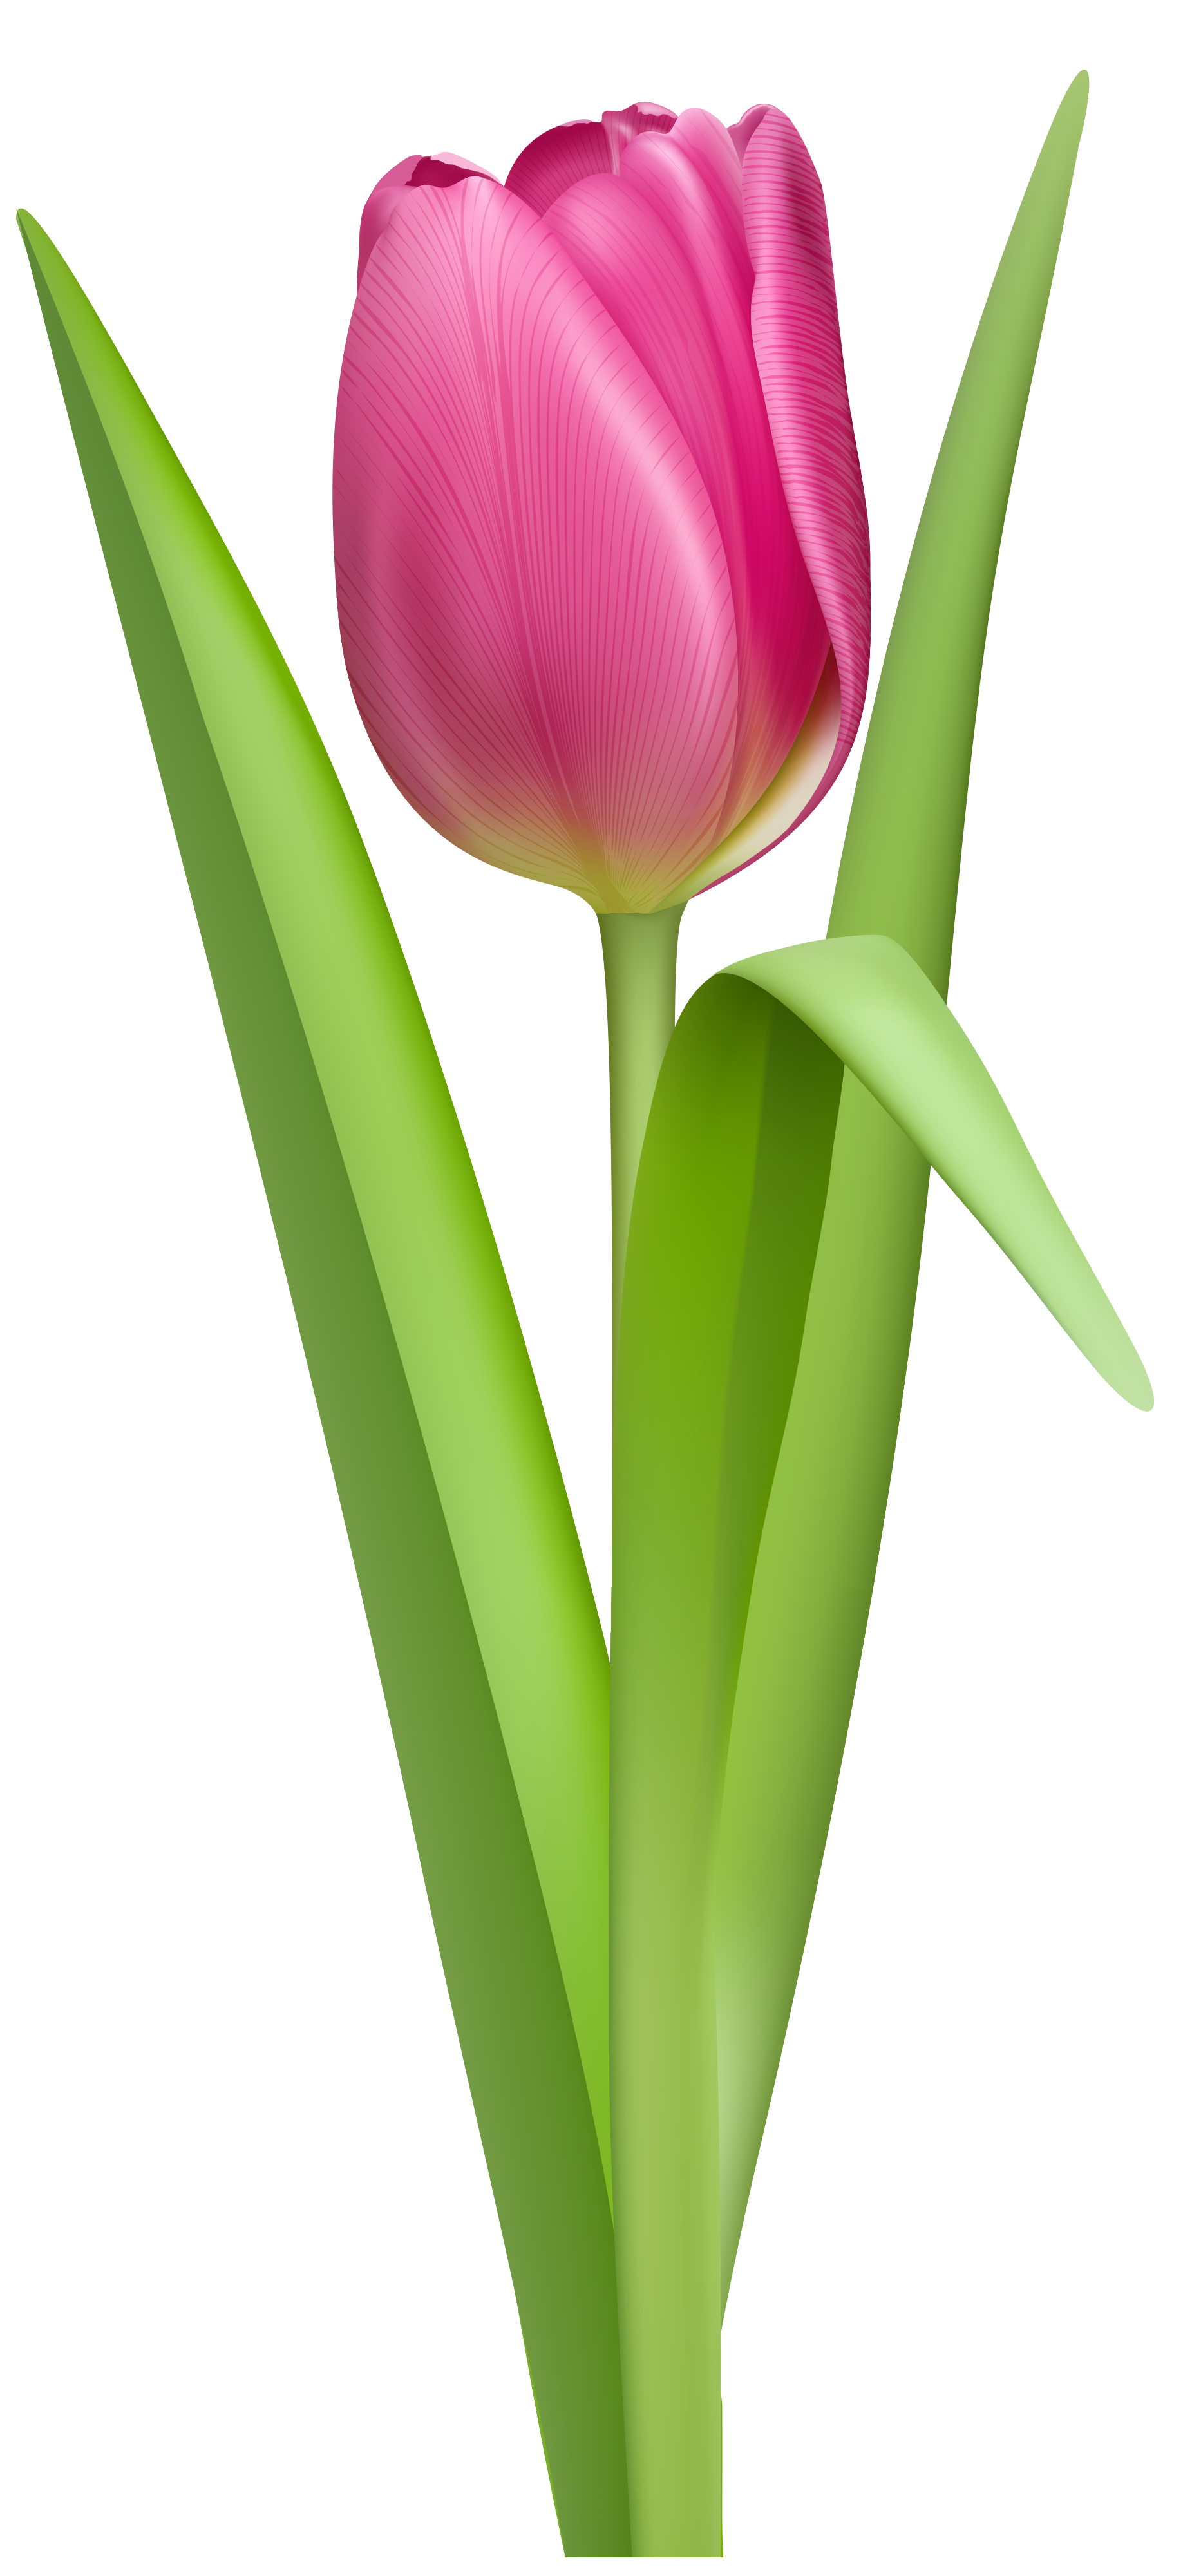 Pink tulip clip art clipart free download